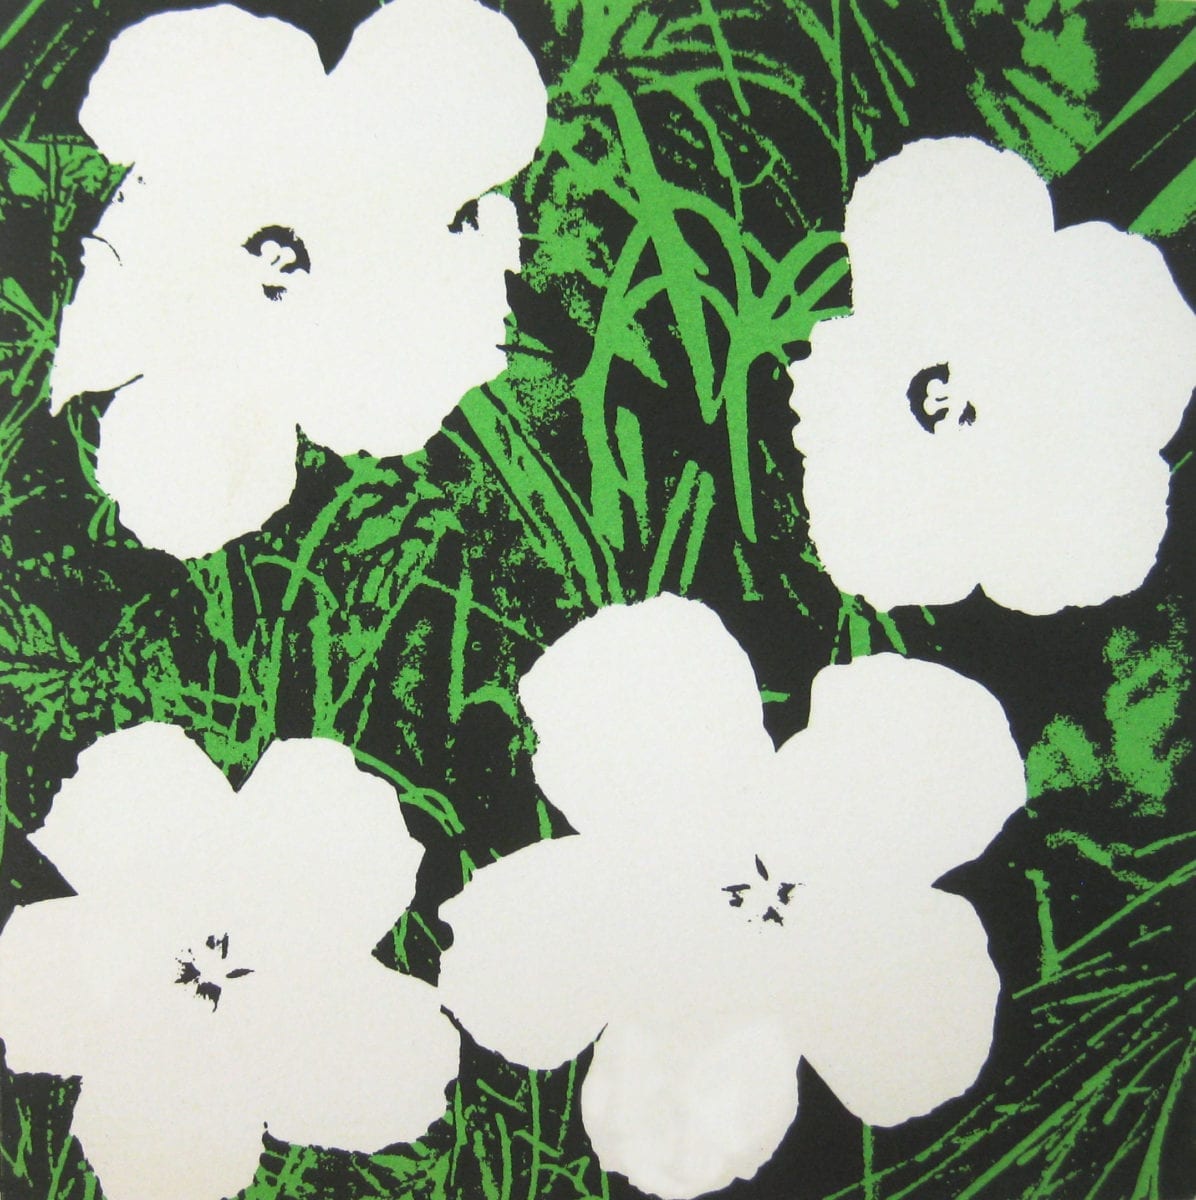 Andy Warhol, Flowers (MoMA). 1965.
Image courtesy of Alden Projects, New York.